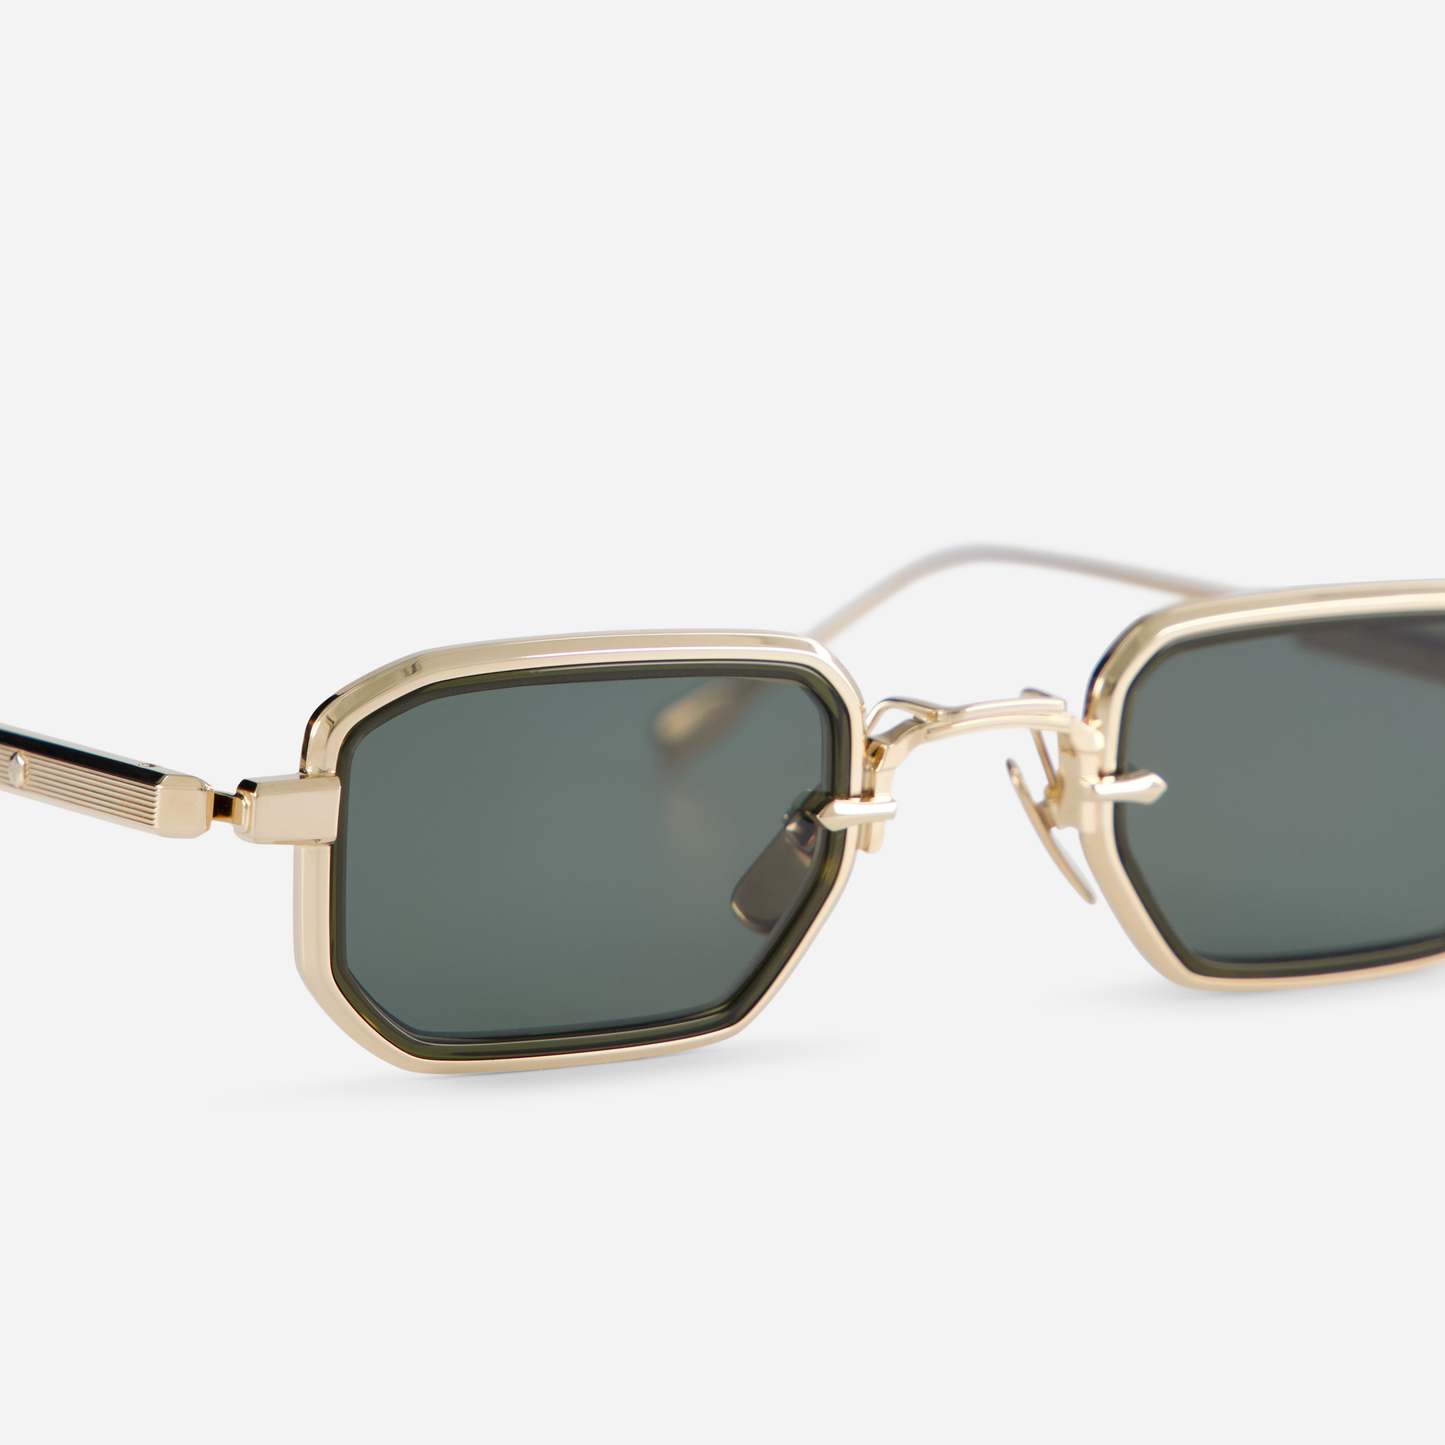 With a titanium frame adorned with a lunar gold coating, the Deneb-T LG-1 eyewear incorporates a green olive takiron rim insert and G15 green lenses.